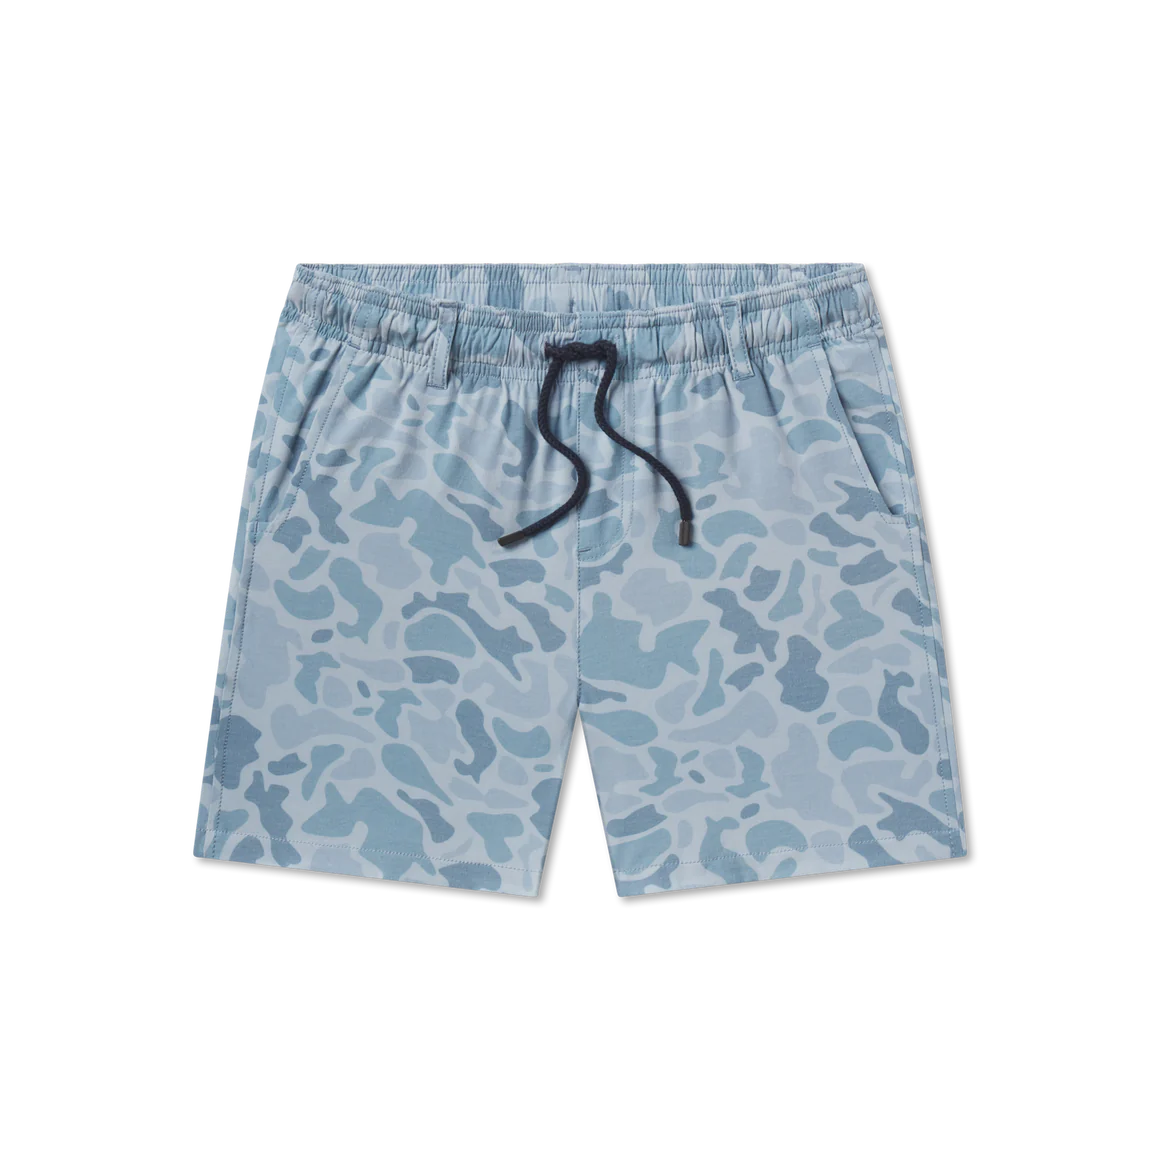 Southern Marsh Youth Harbor Stretch Seawash Lined Swim Trunks Light Blue Camo